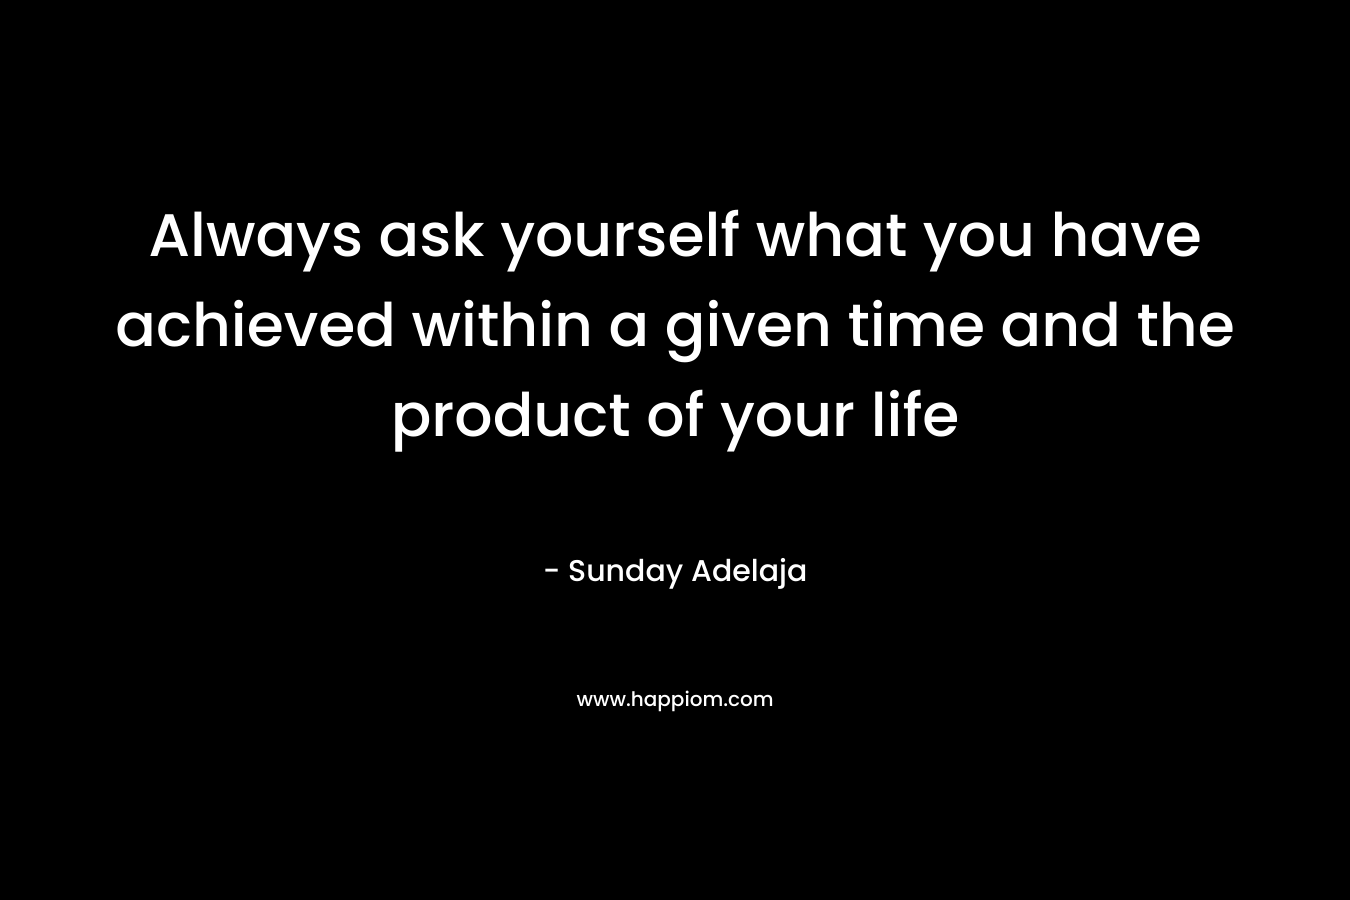 Always ask yourself what you have achieved within a given time and the product of your life